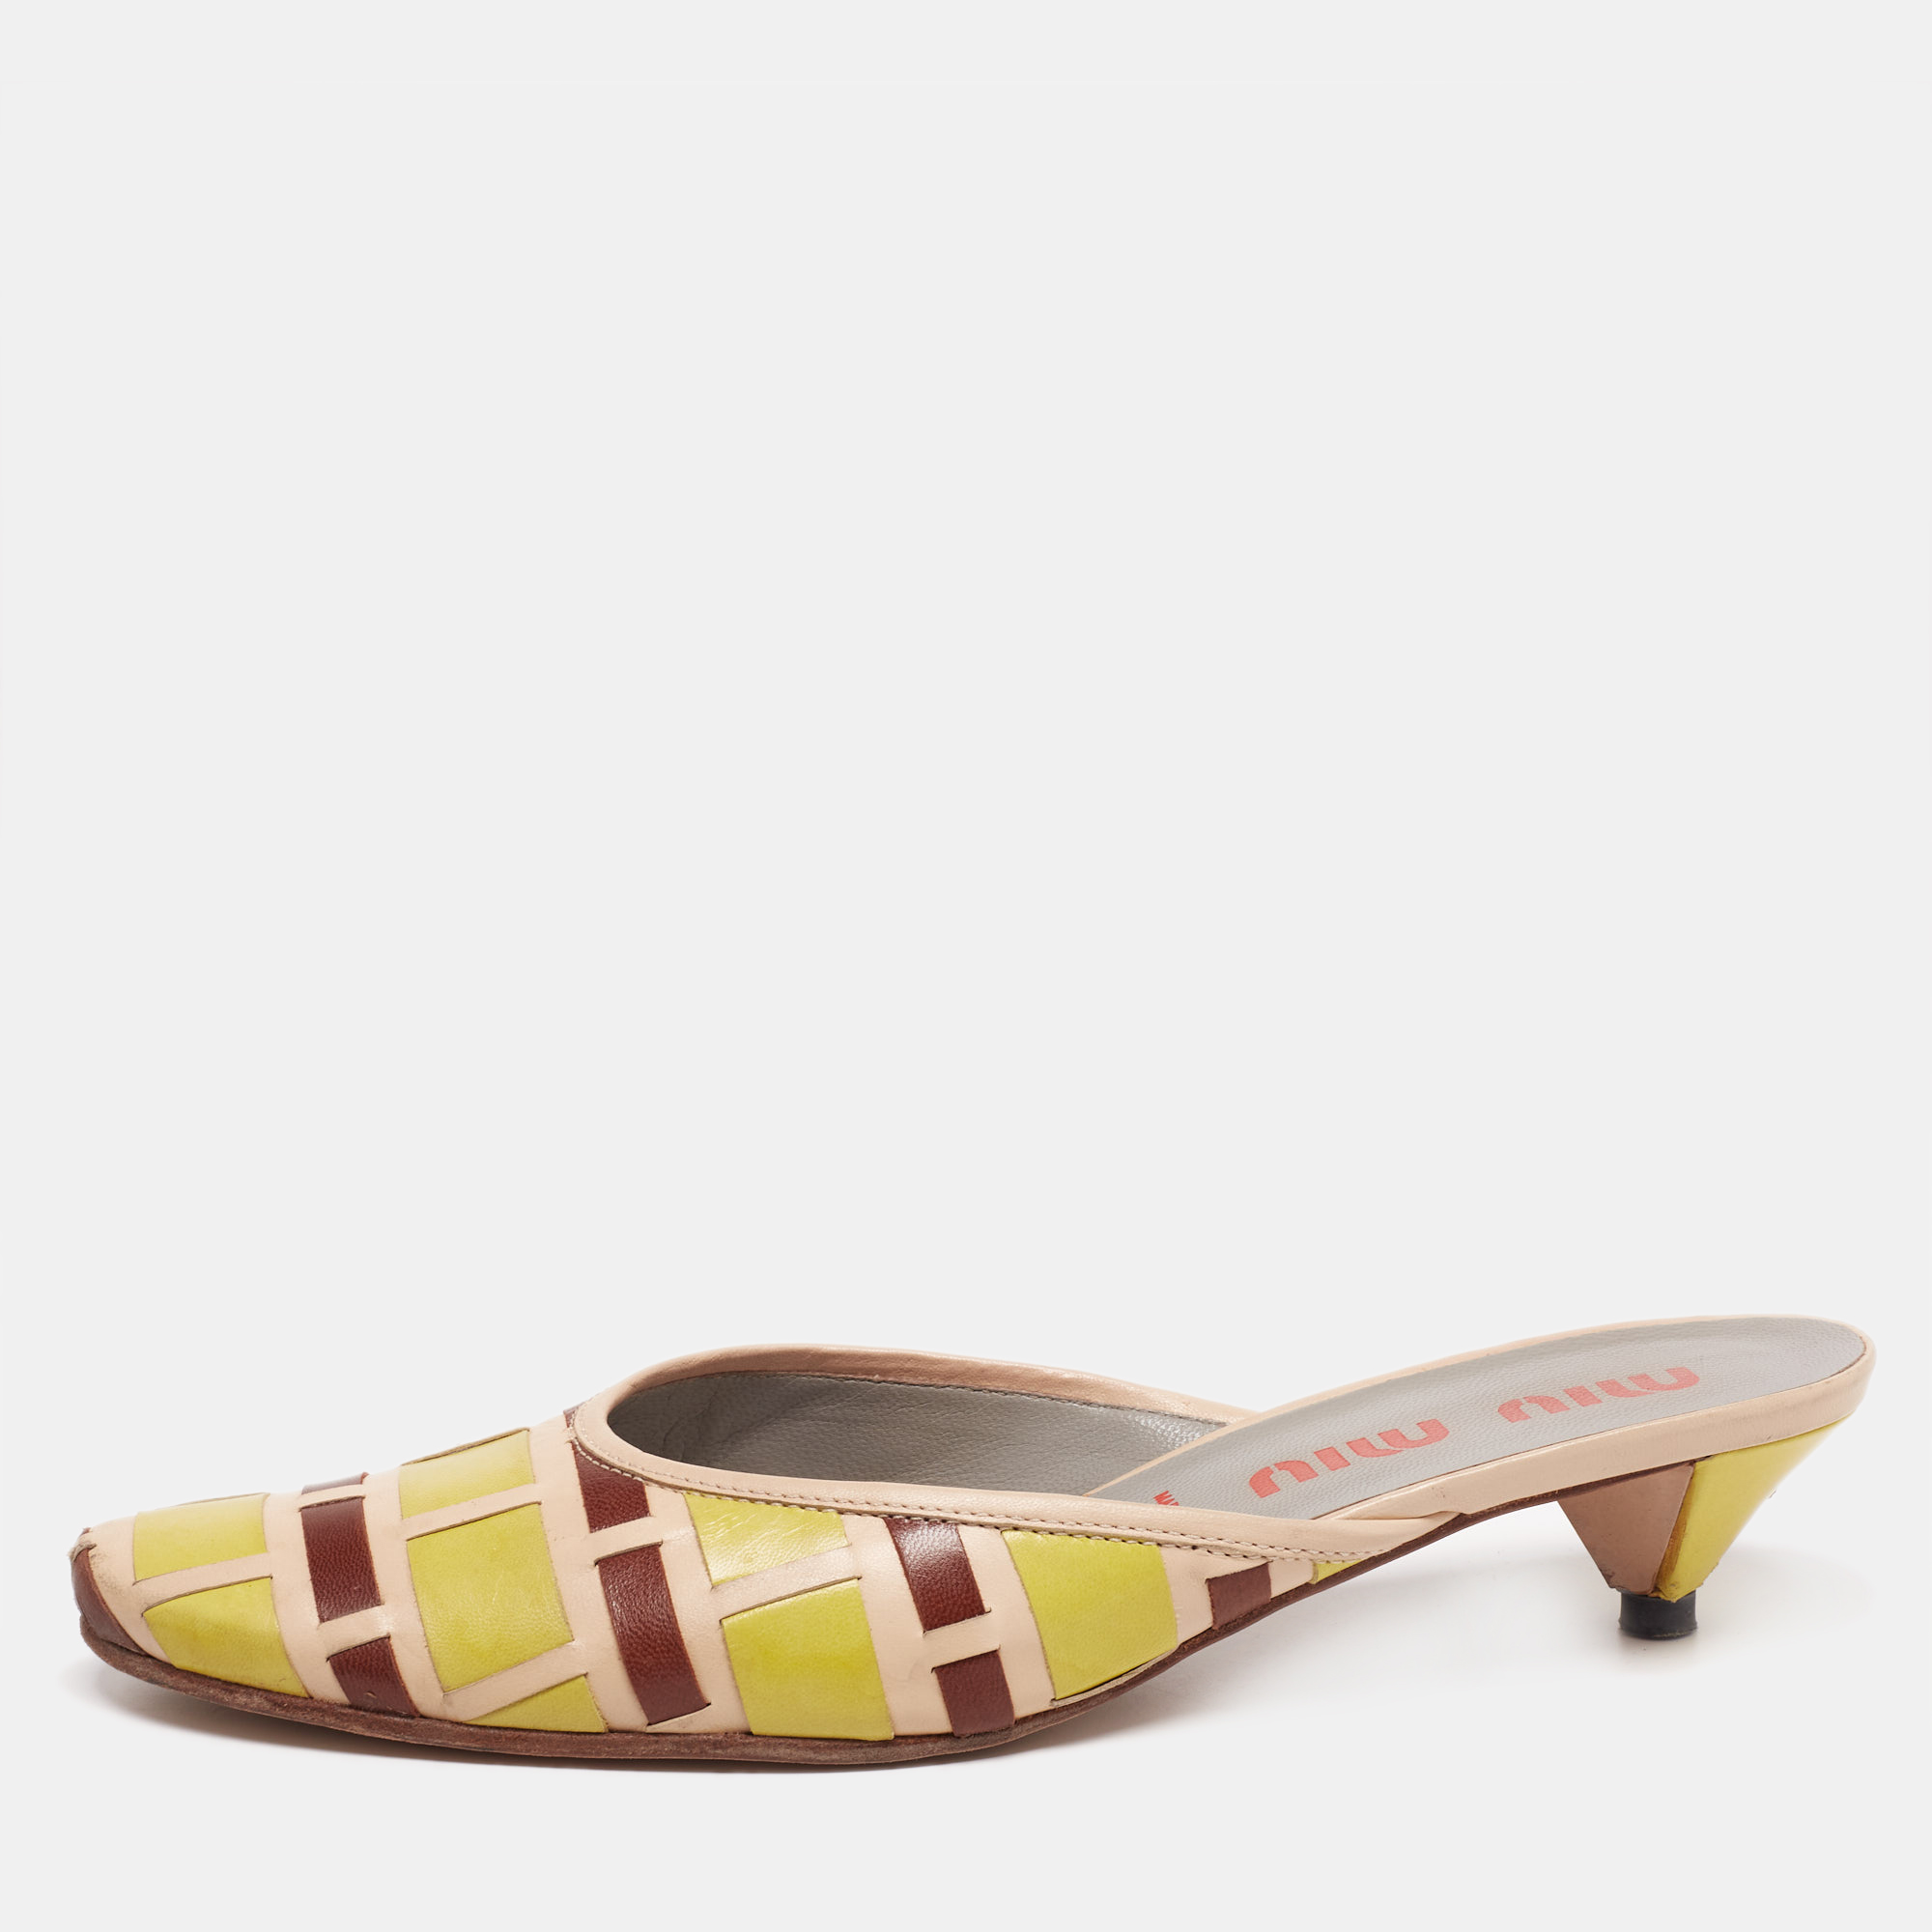 These Miu Miu sandals are designed to offer you comfort without compromising on style. Crafted from tricolor woven leather they flaunt 5cm heels a sleek silhouette and a slip on fitting.